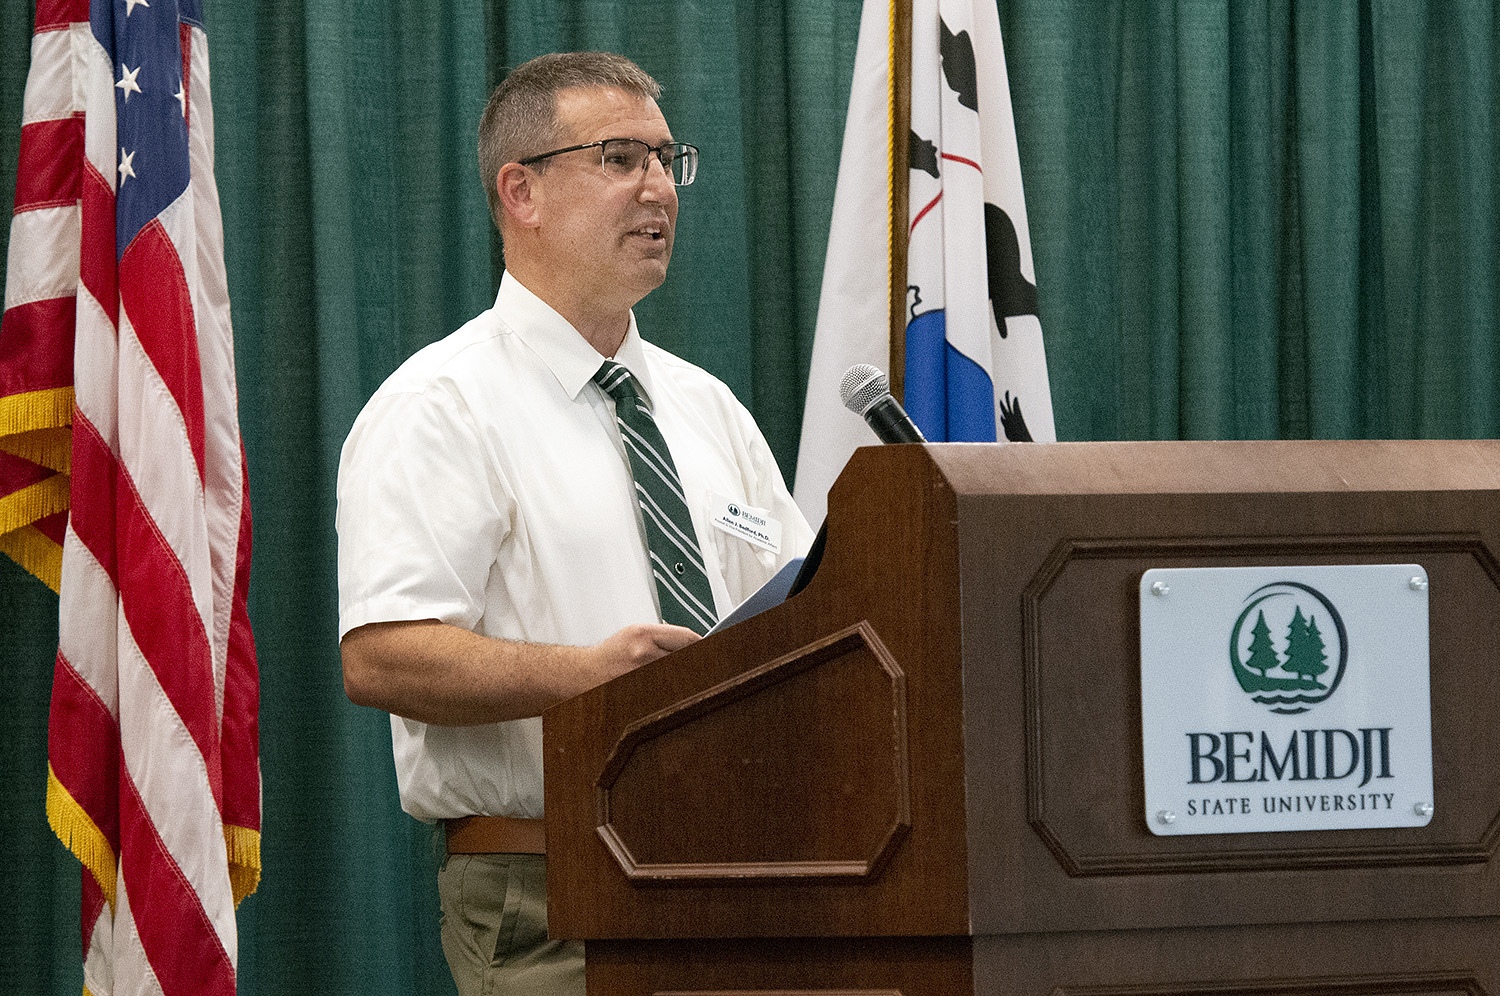 Bemidji State University Provost and Vice President for Academic Affairs Allen Bedford served as emcee